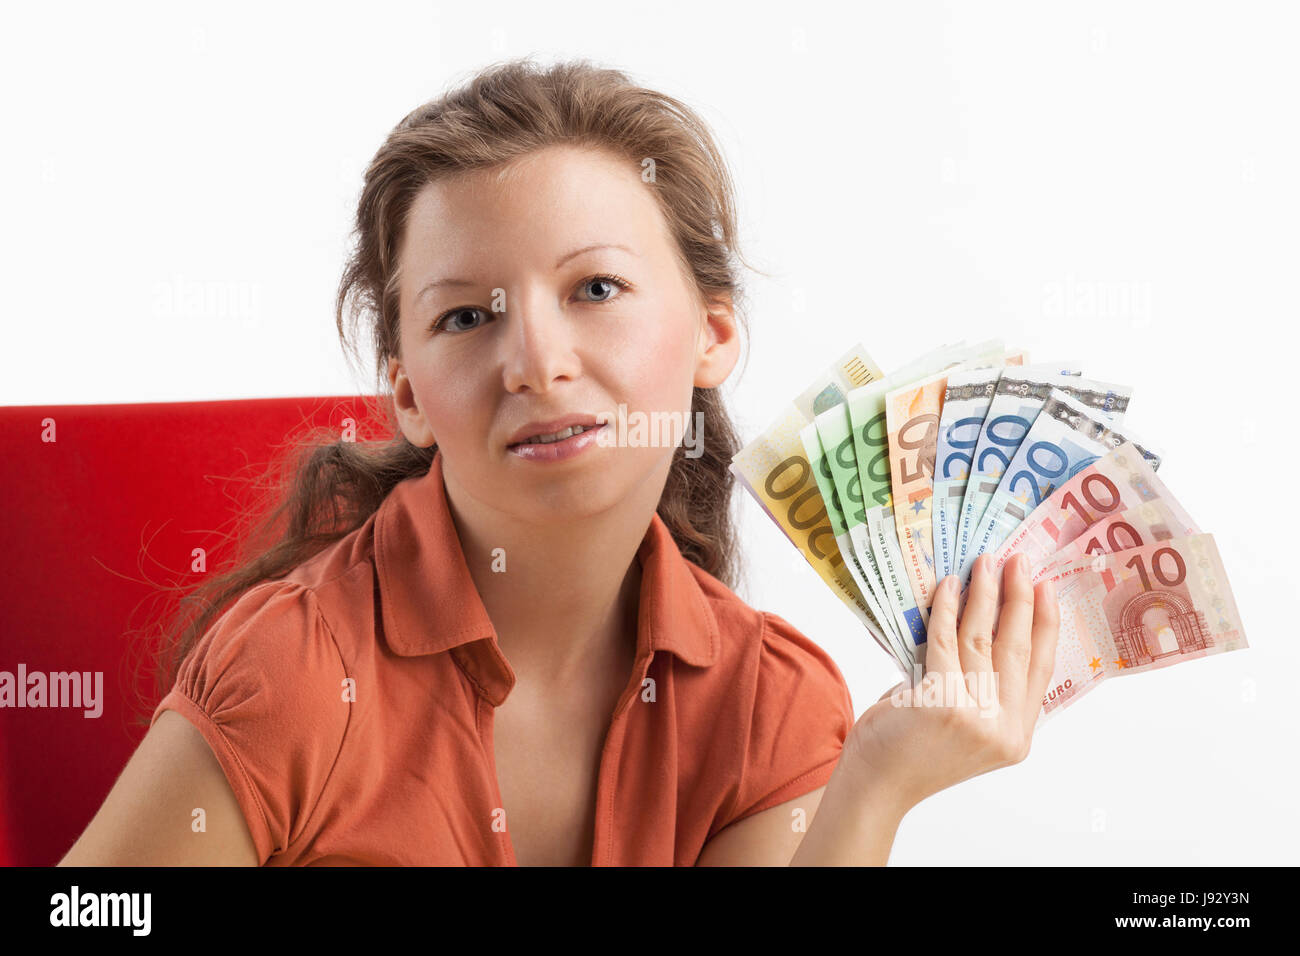 woman, provision, luxury, expenditure, pomp, affluence, magnificence, Stock Photo